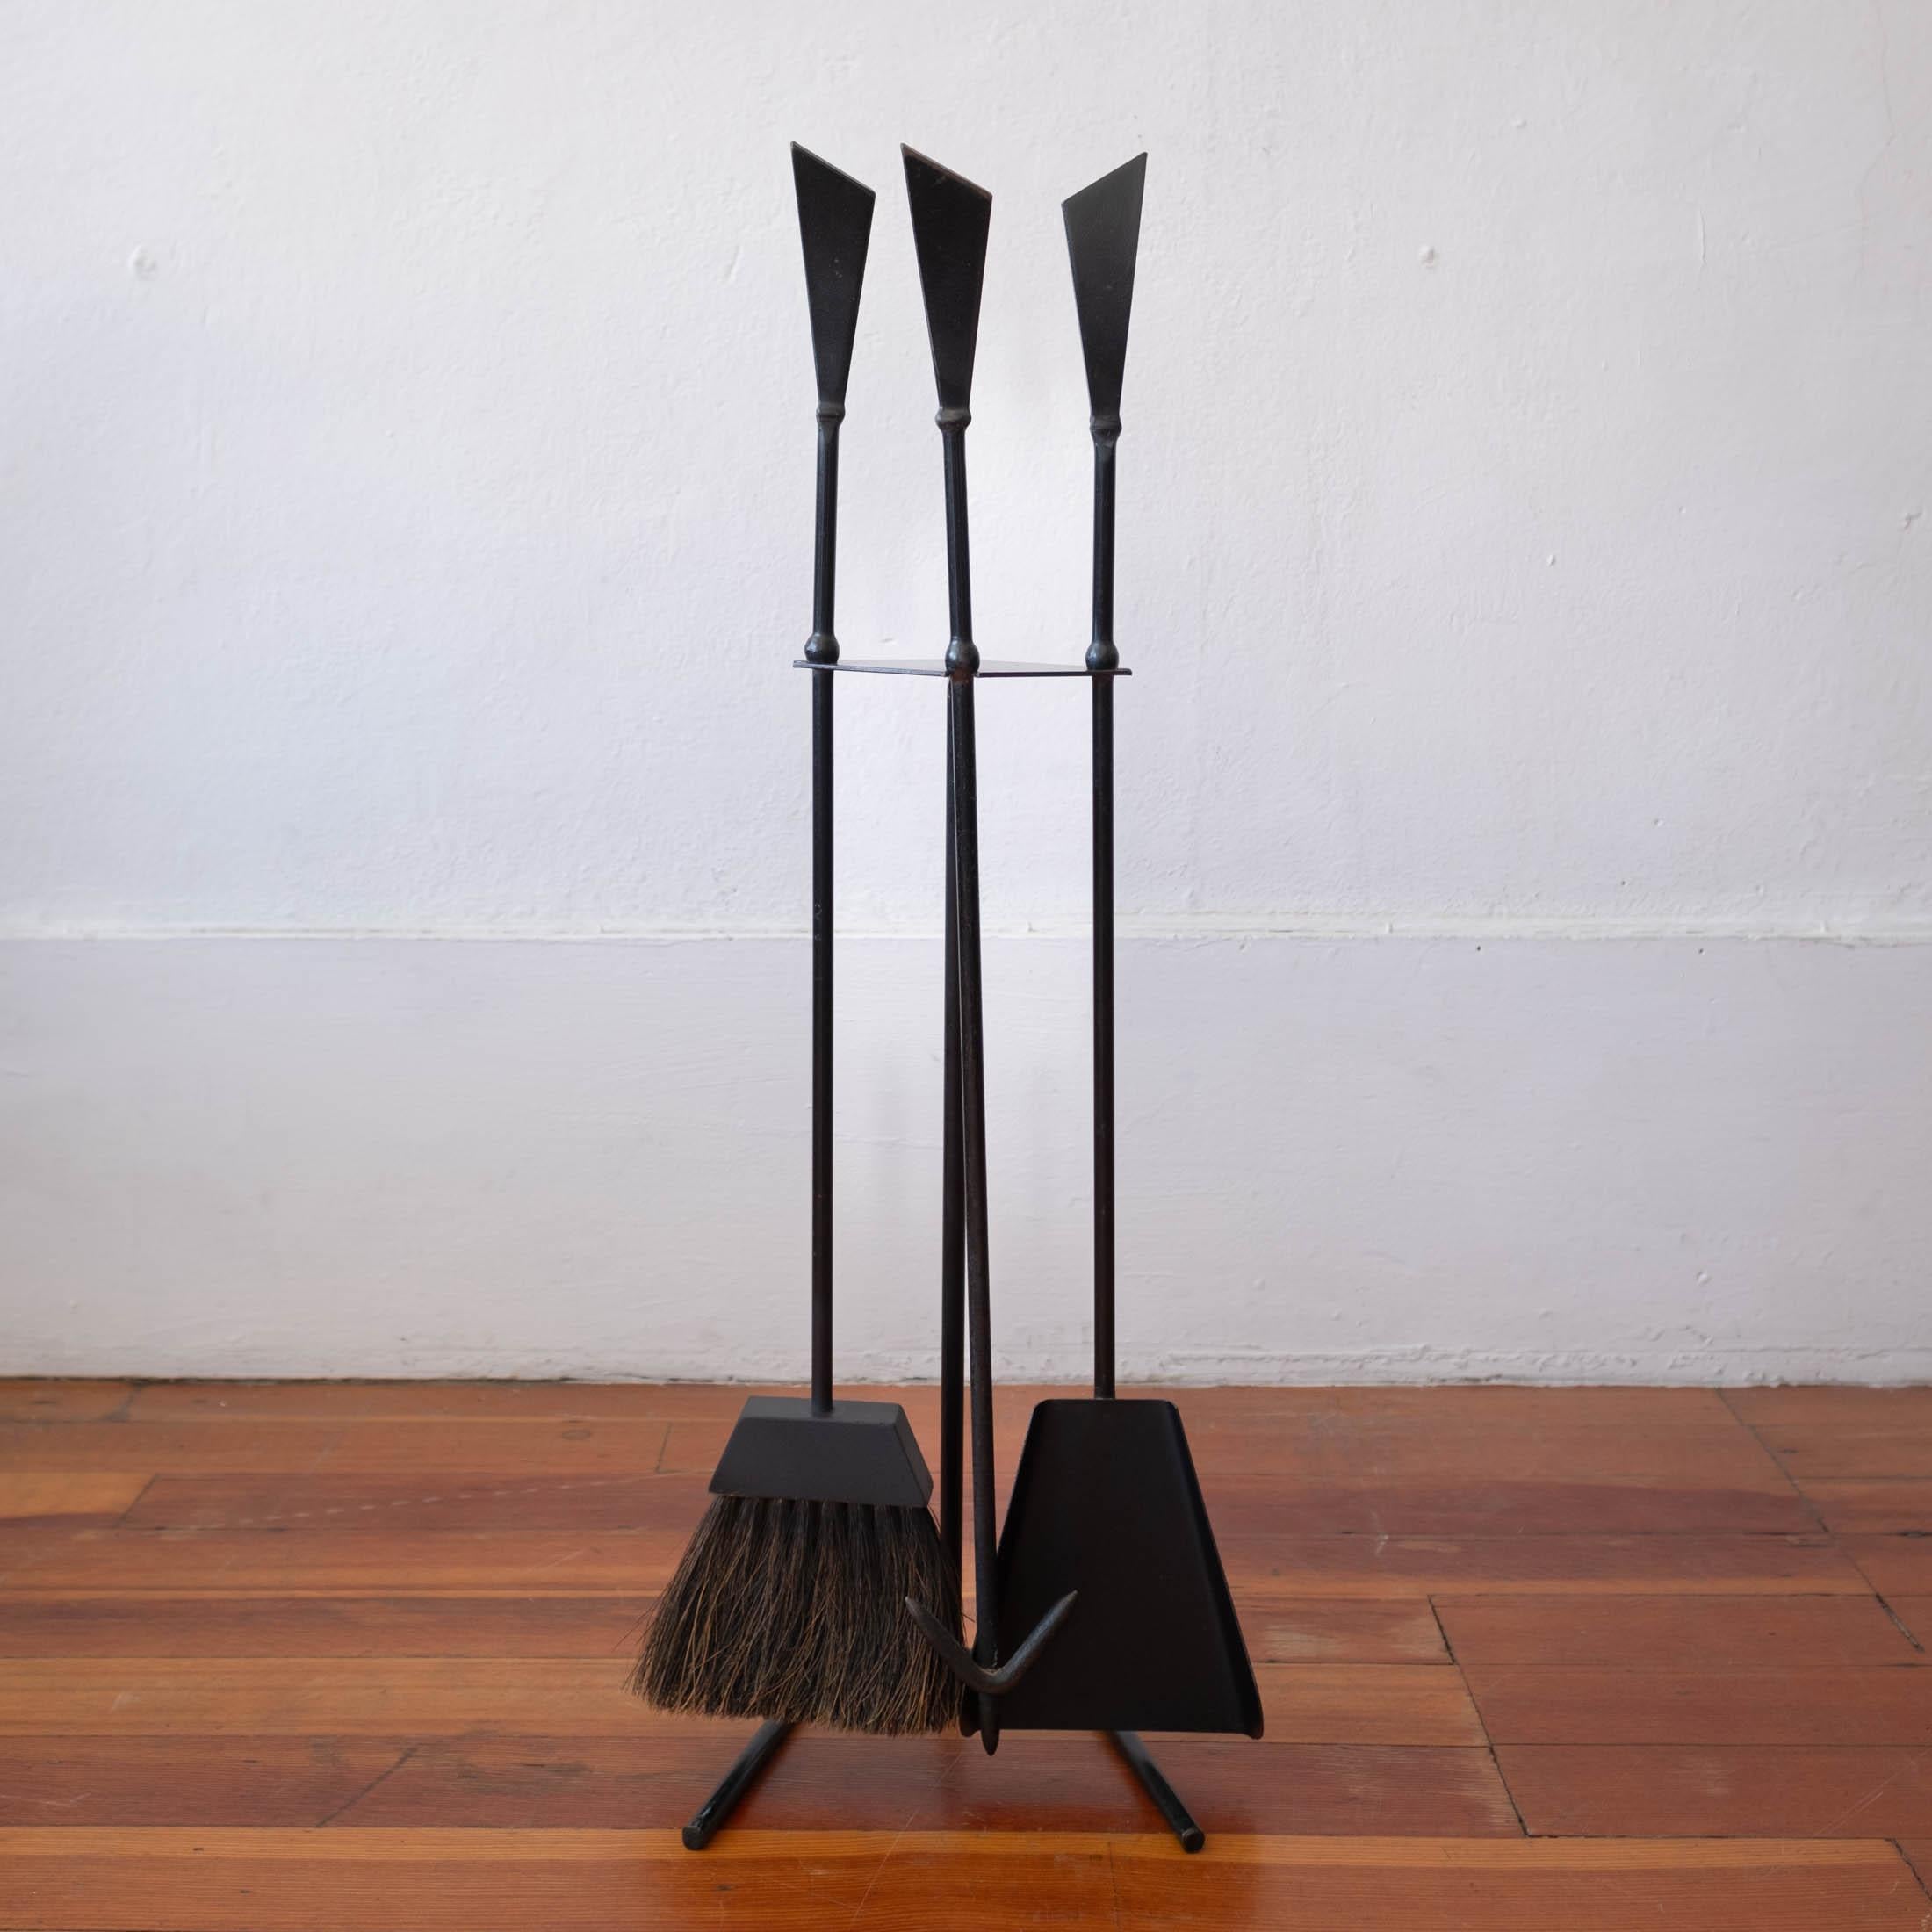 A fantastic modernist iron fire tool set. Includes a poker, brush and shovel on a solid iron stand. USA, 1950s